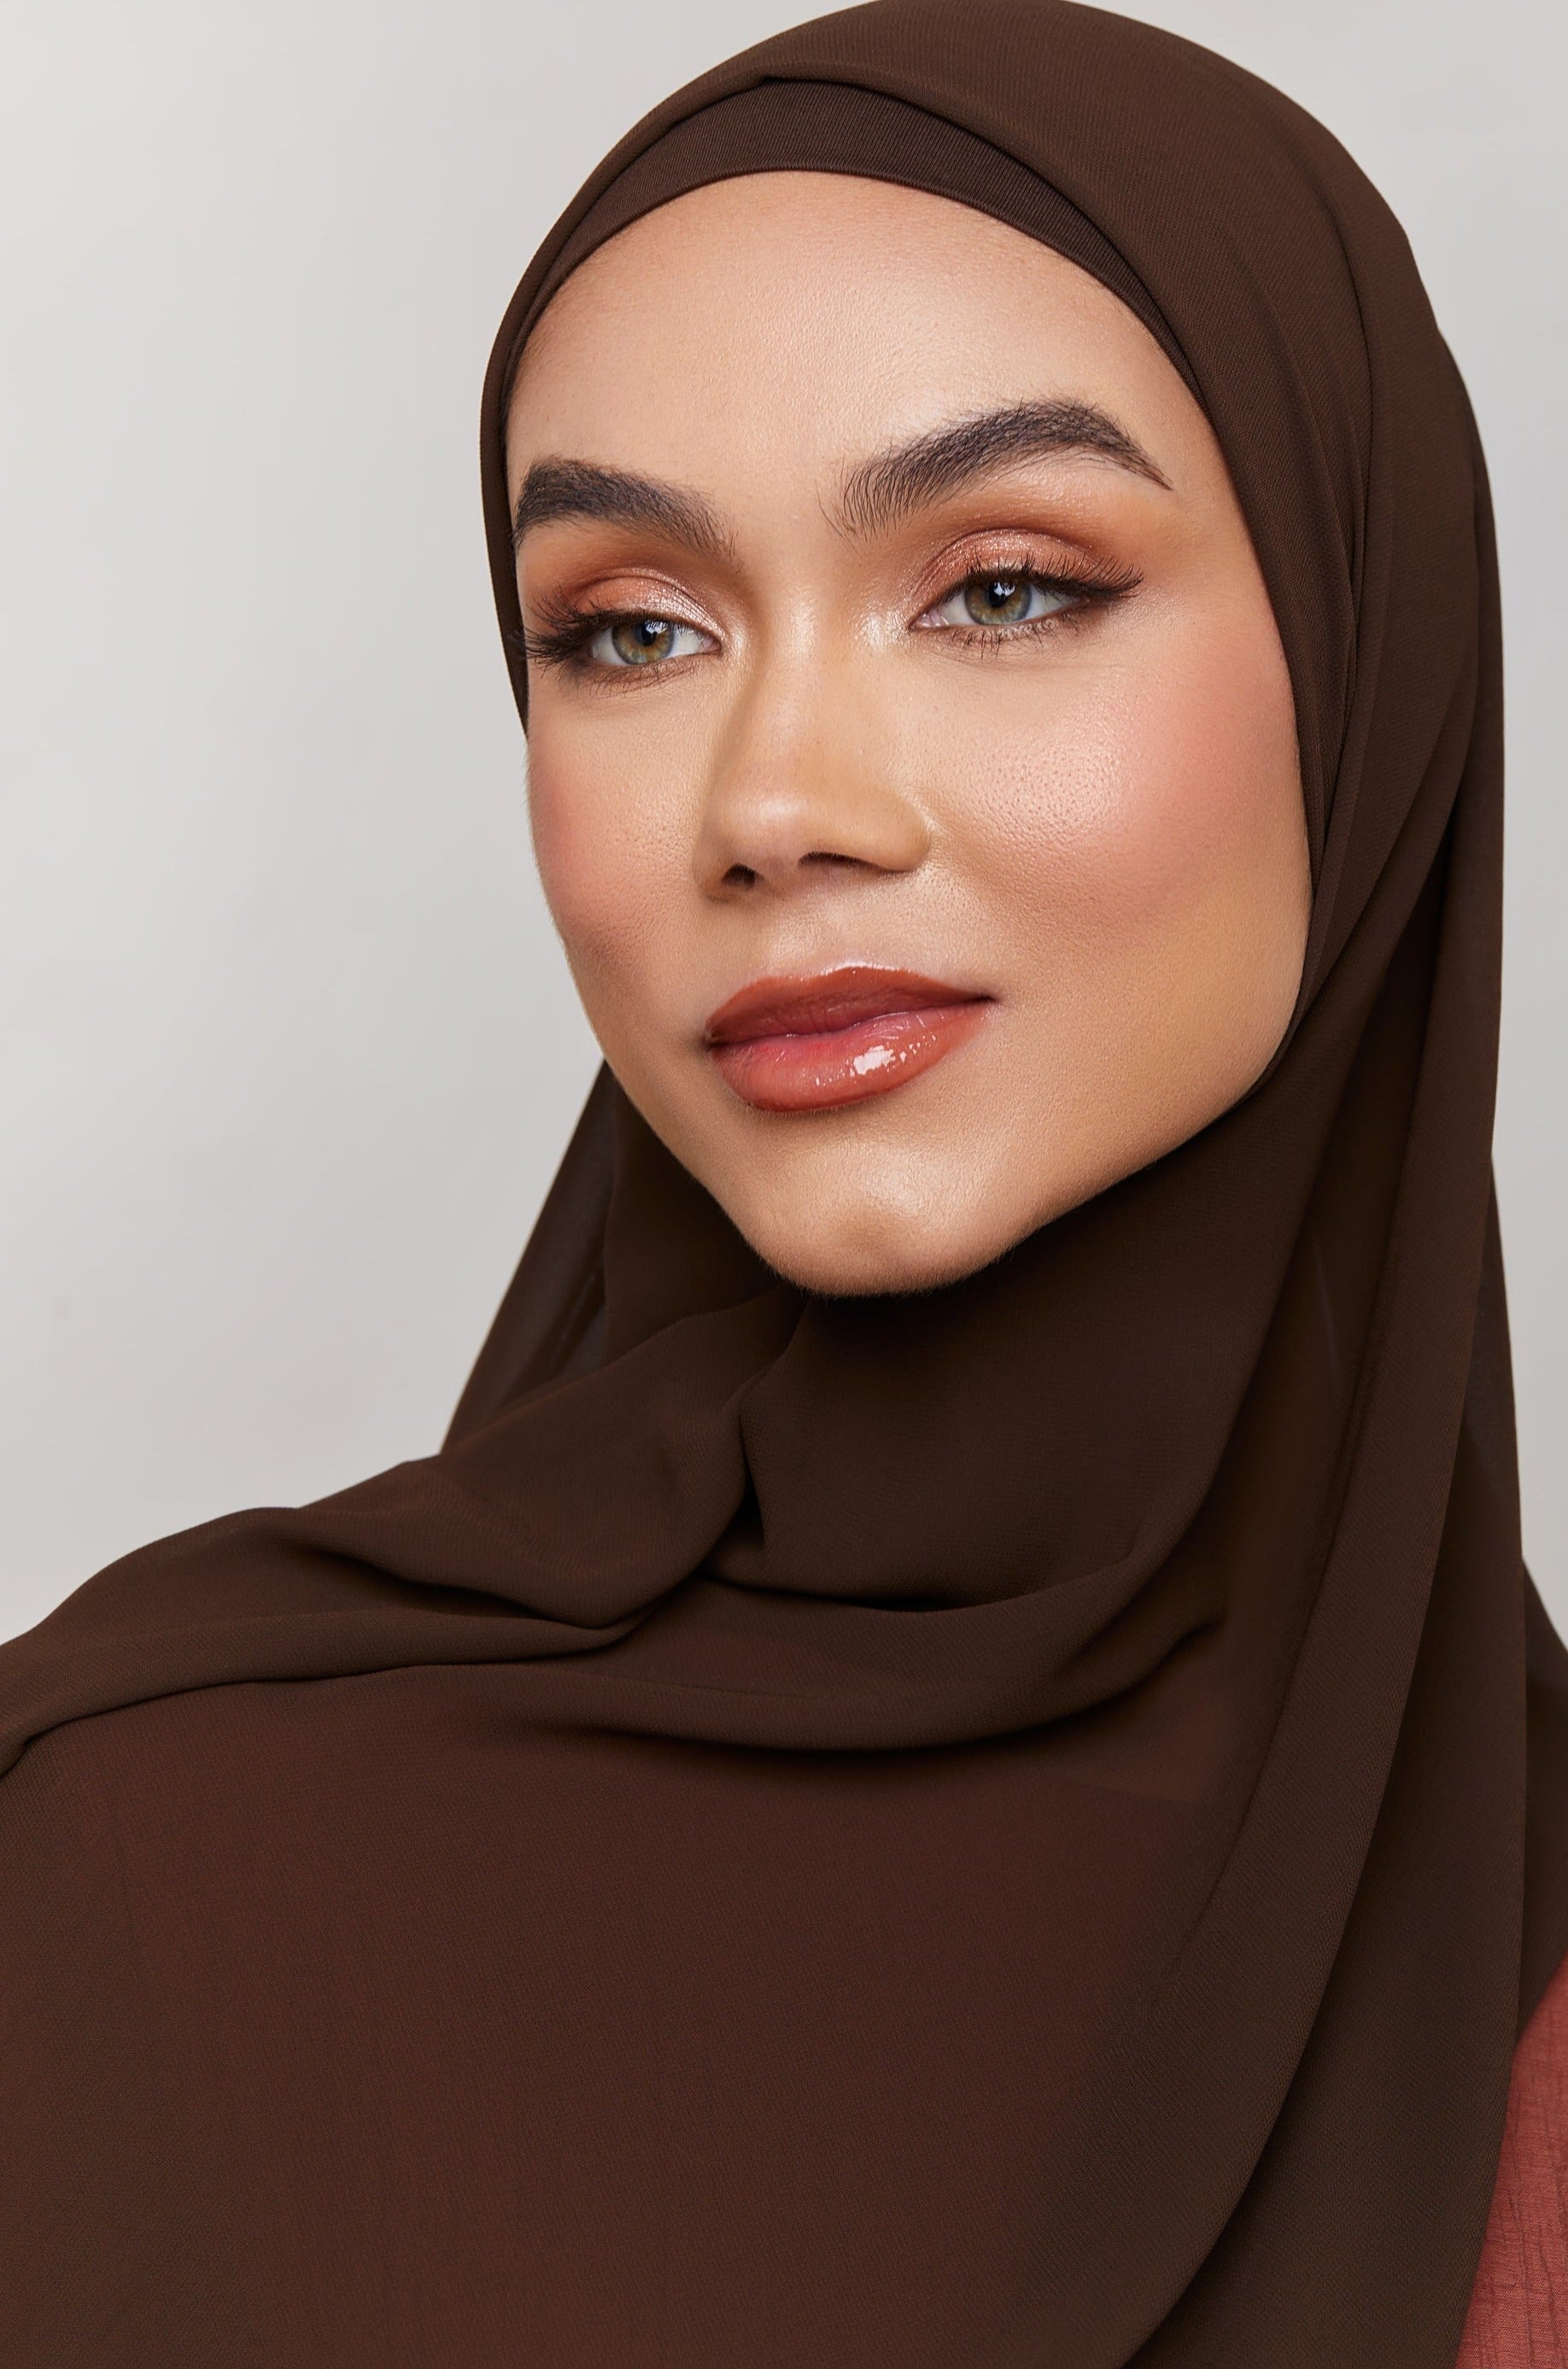 Deanna ديانا on X: Justice, clothing retailer for girls, includes a hijabi  in their ad. #hijab  / X